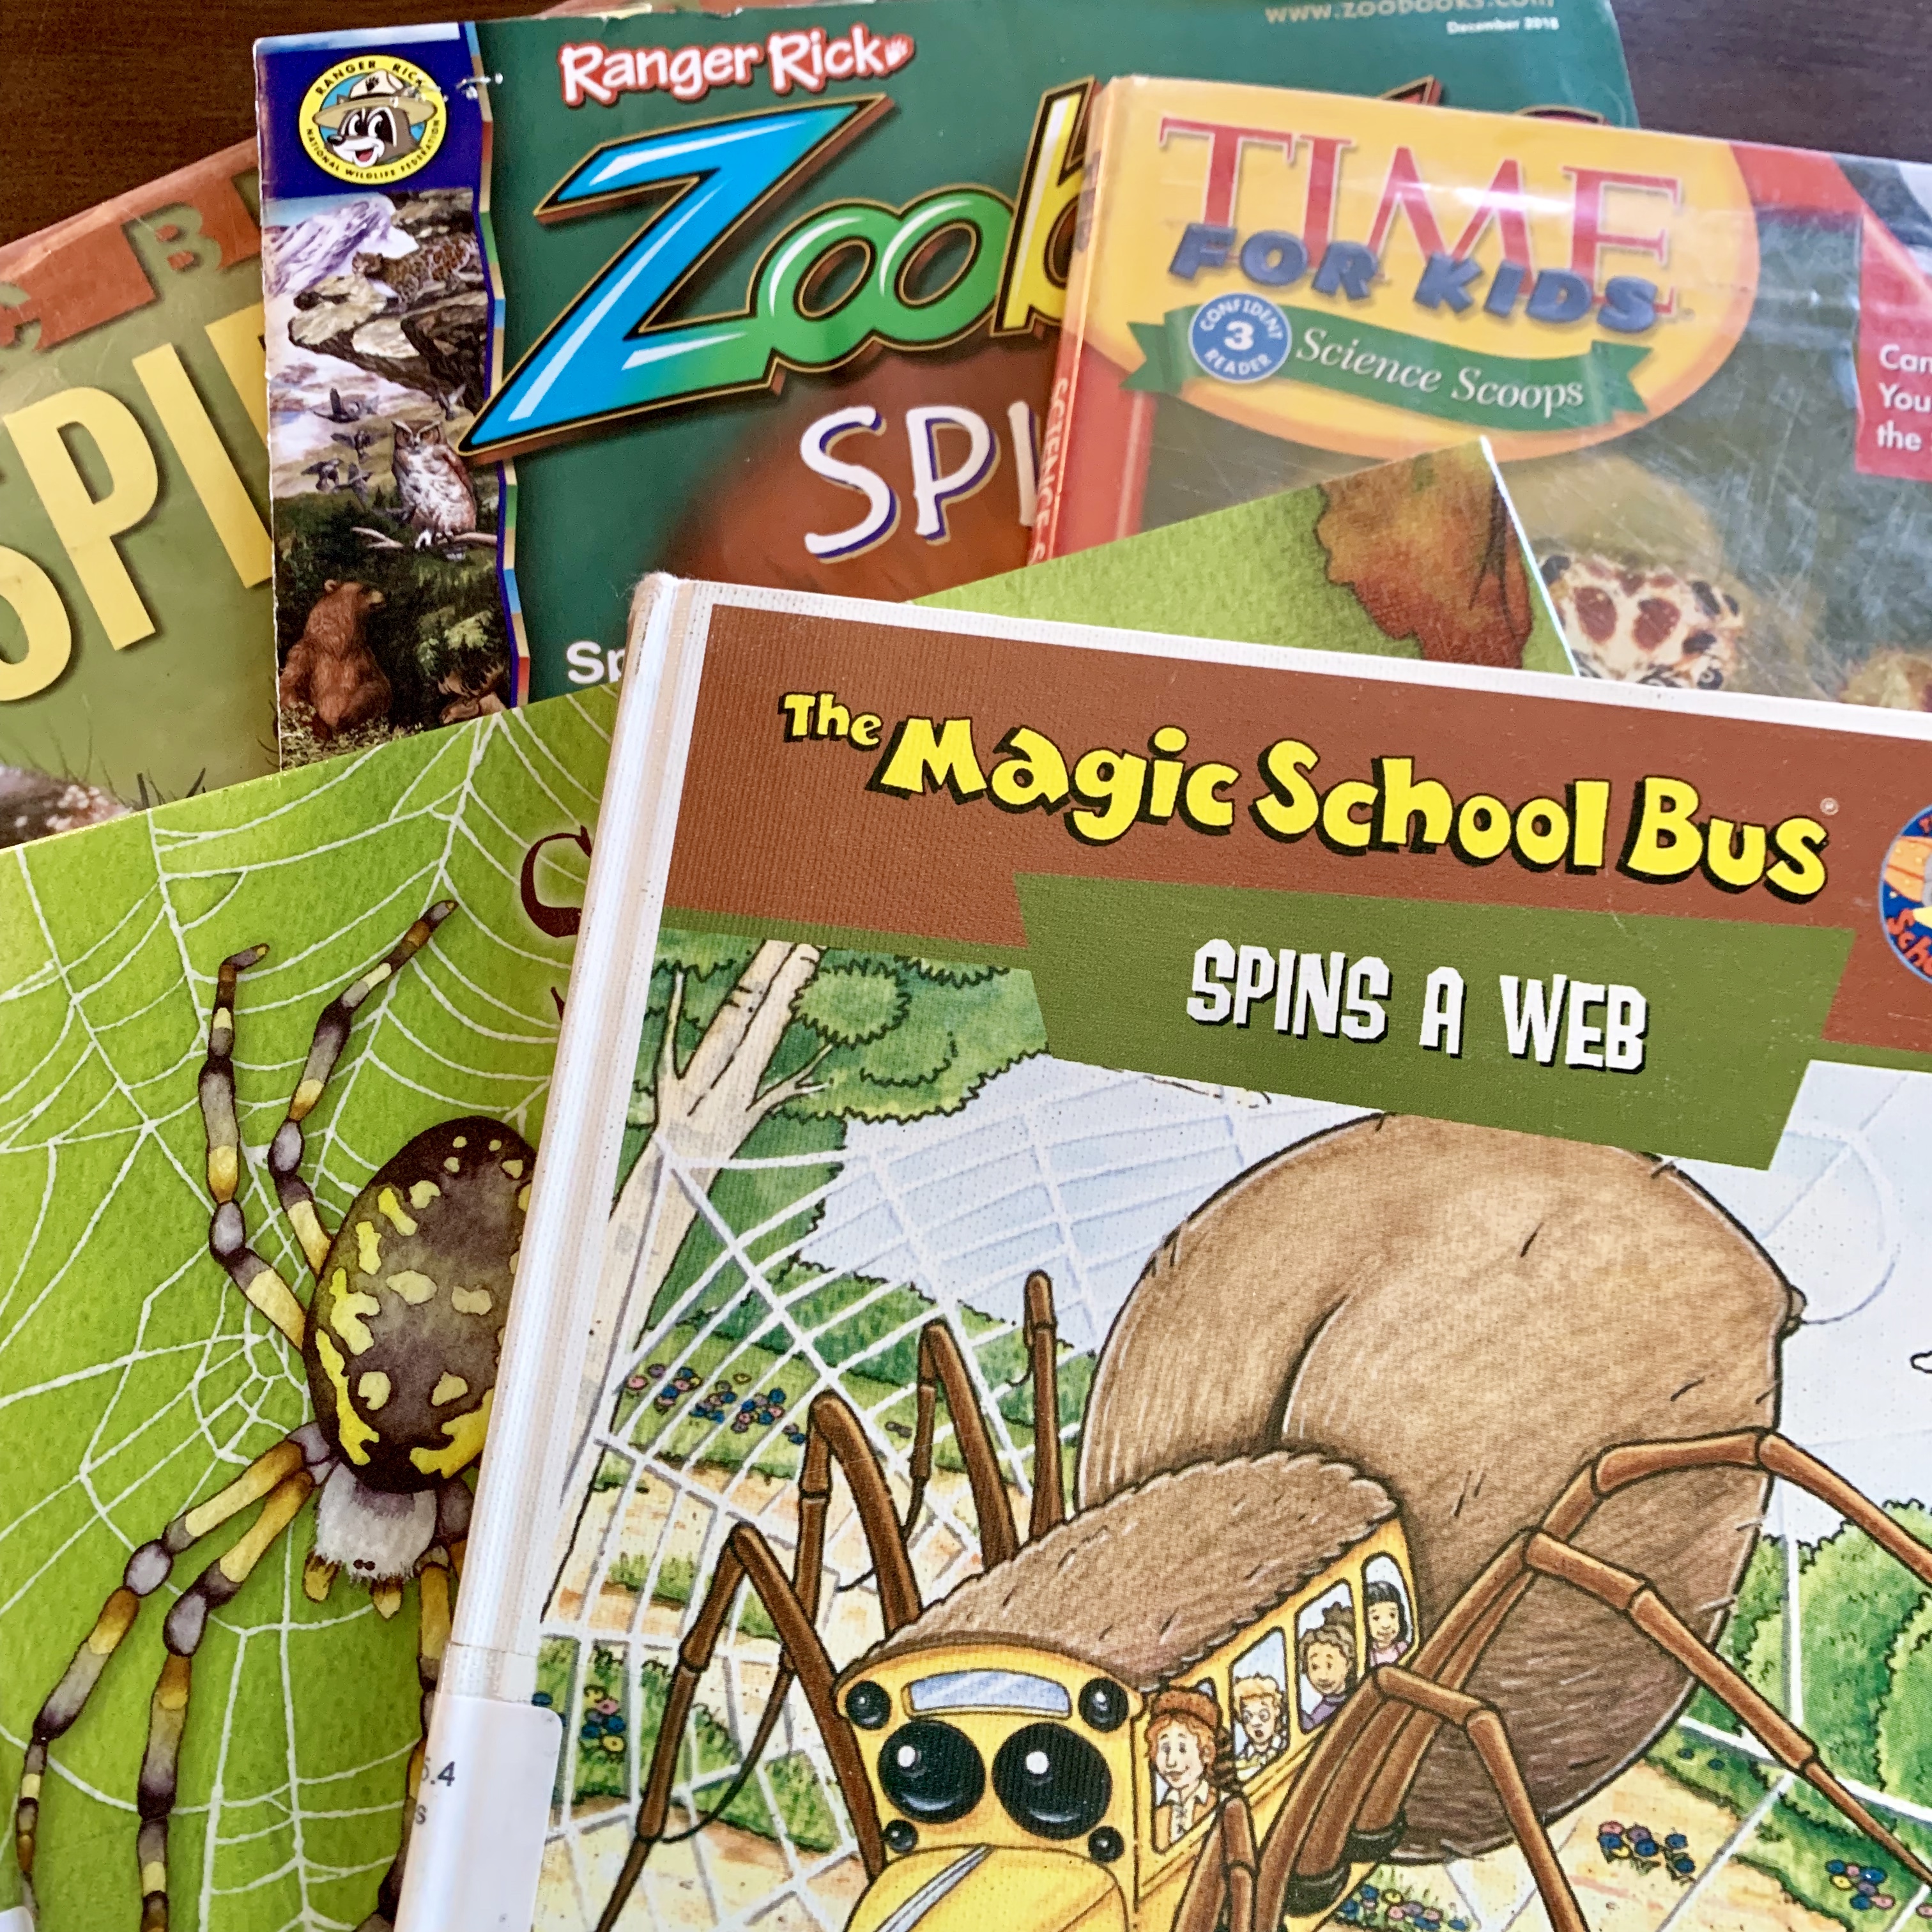 Spider Books and Activities for Little Learners